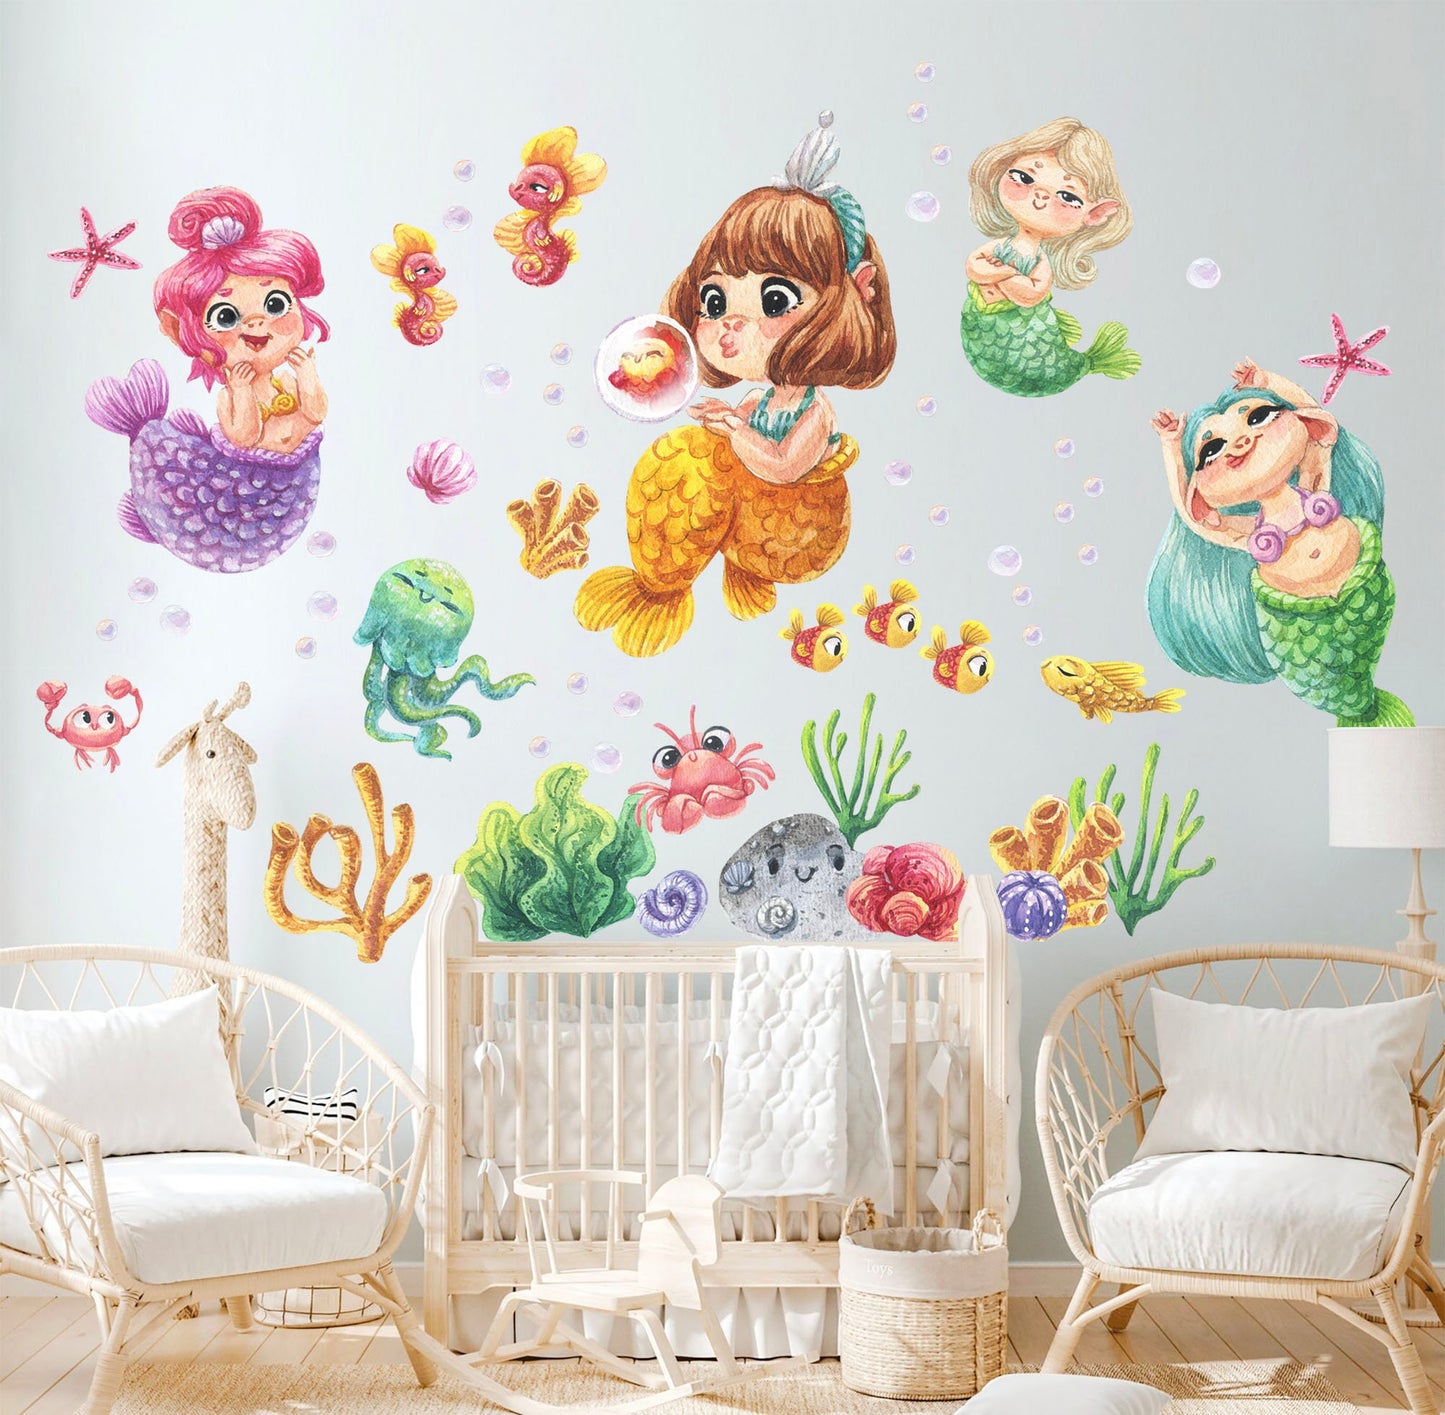 Playful Undersea Mermaids Cartoon Wall Decal - Seahorse Jellyfish Crab & More! Whimsical Watercolor Style for Kids Room - BR307